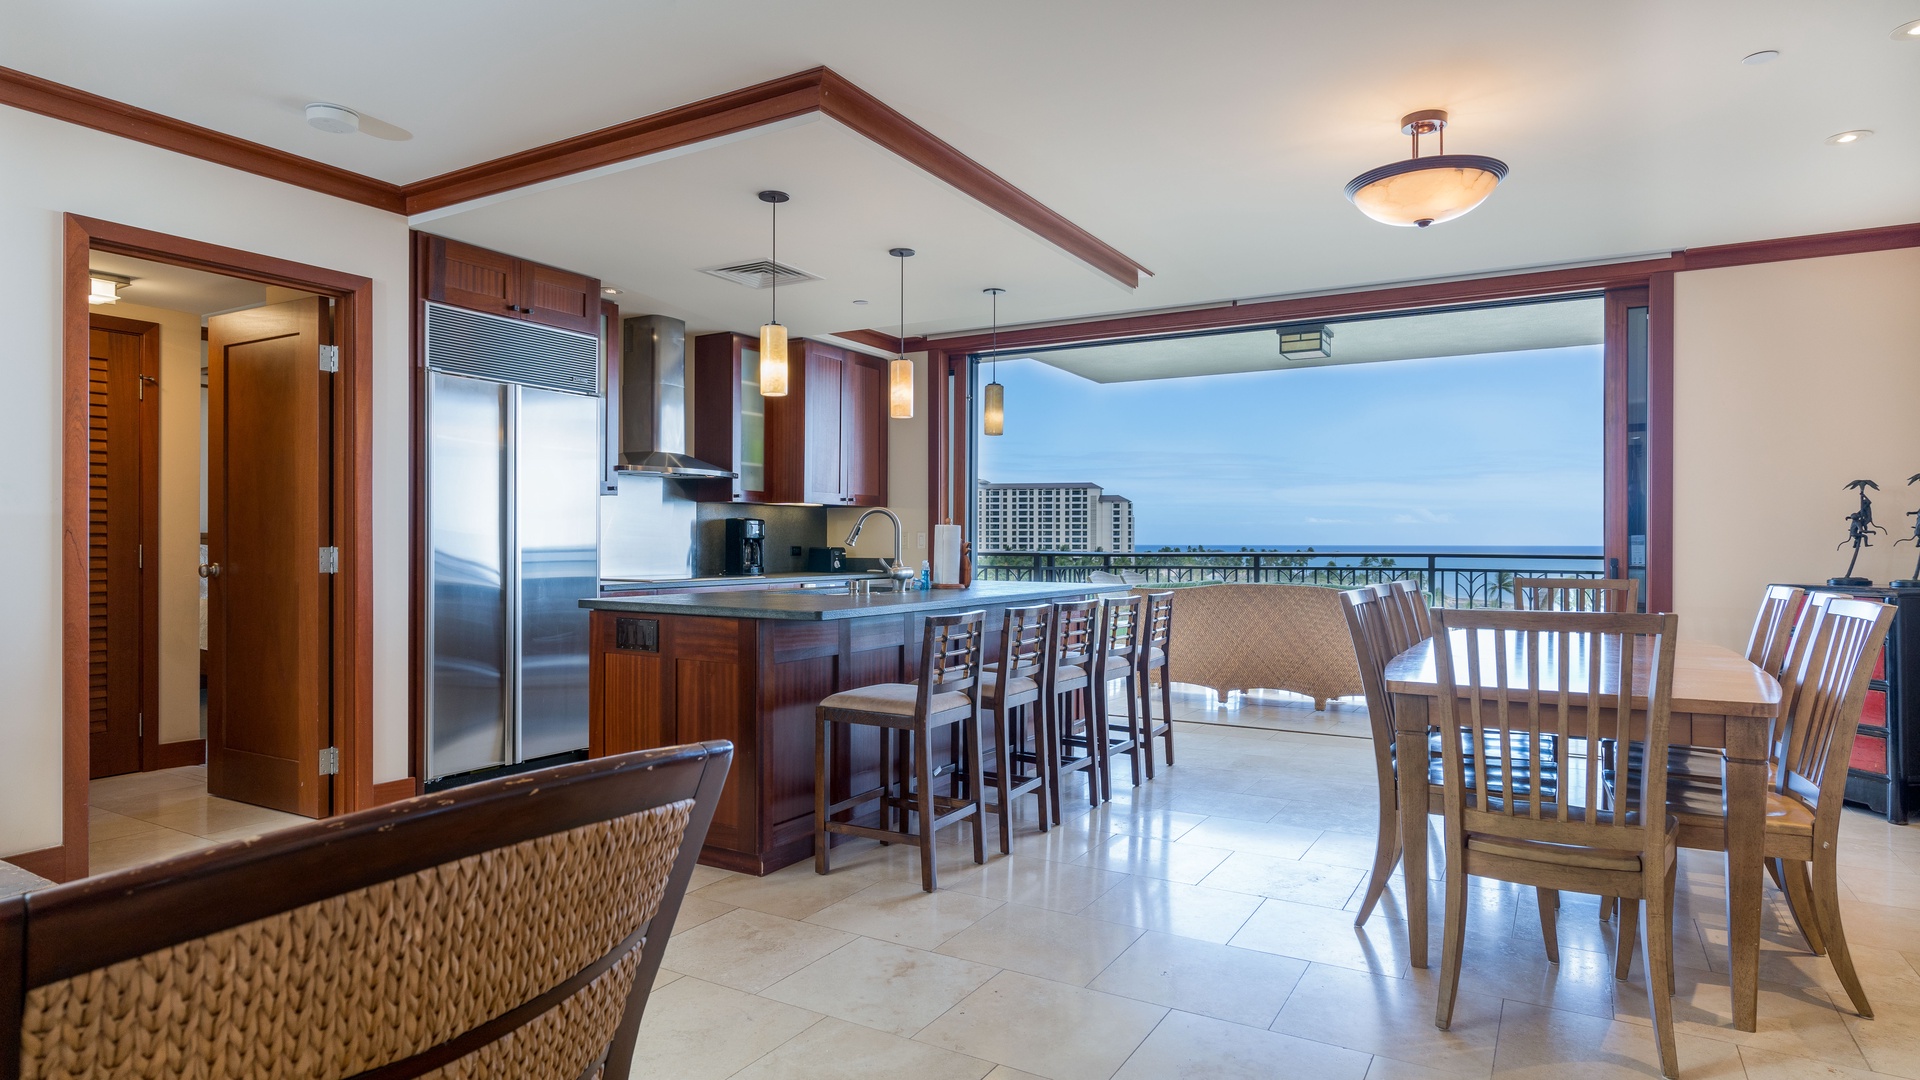 Kapolei Vacation Rentals, Ko Olina Beach Villas B701 - The open floor plan with bar seating in the kitchen and dining that seats eight.